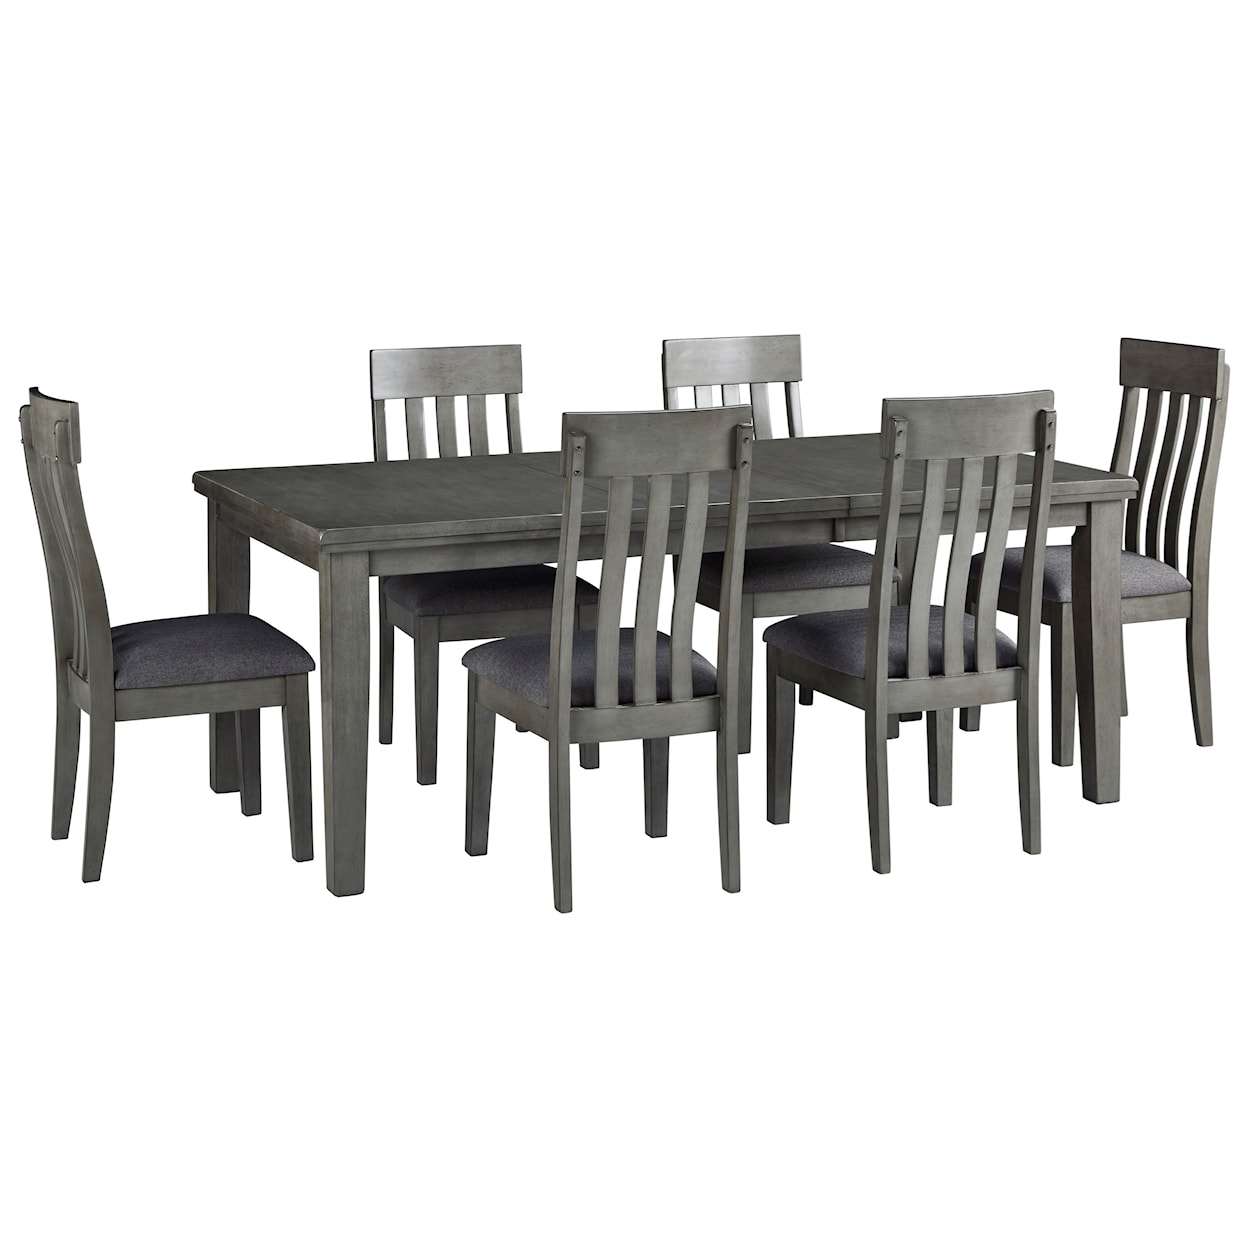 Signature Design by Ashley Hallanden 7-Piece Table and Chair Set